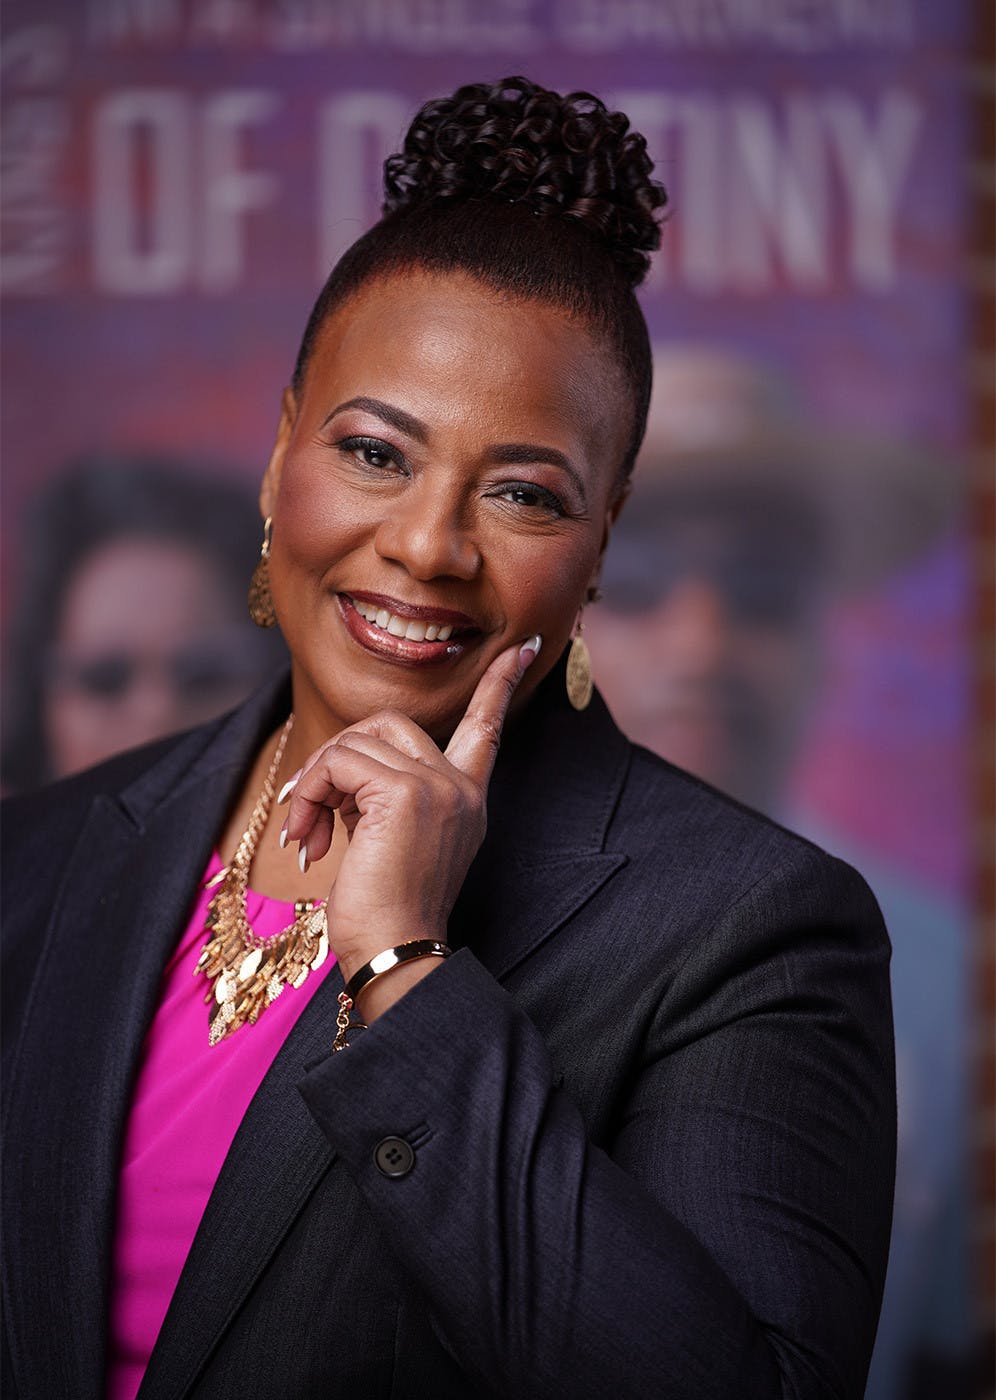 <p>Bernice King, daughter of Martin Luther King Jr., will be speaking at the Day of Celebration on Jan. 18. She has led the King Center as CEO since 2012. / Courtesy of the Martin Luther King Jr. Commission of Mid-Michigan</p><p></p>